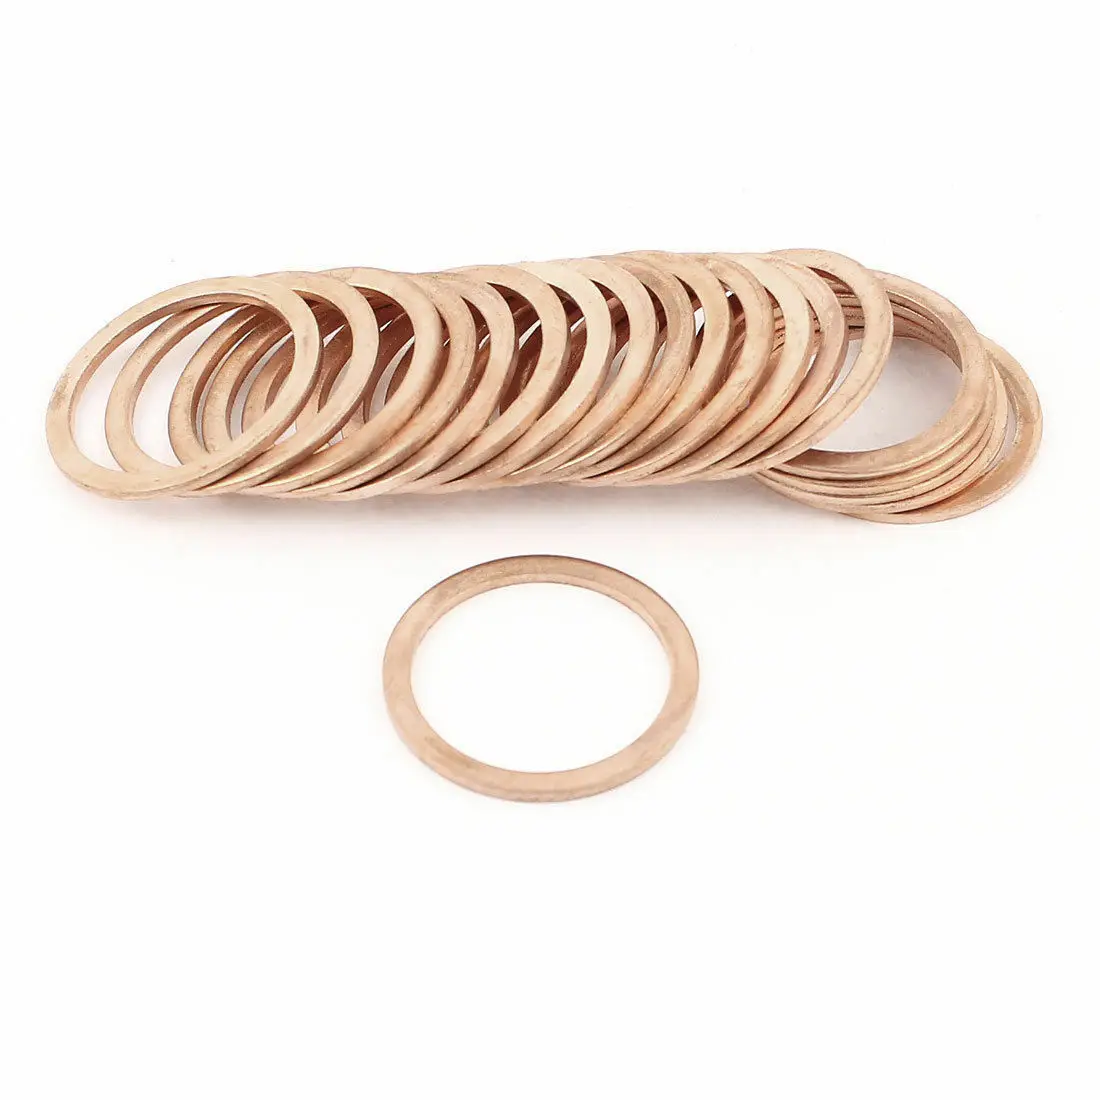 Copper Washers 26mm x 34mm x 2mm Pack of 10 